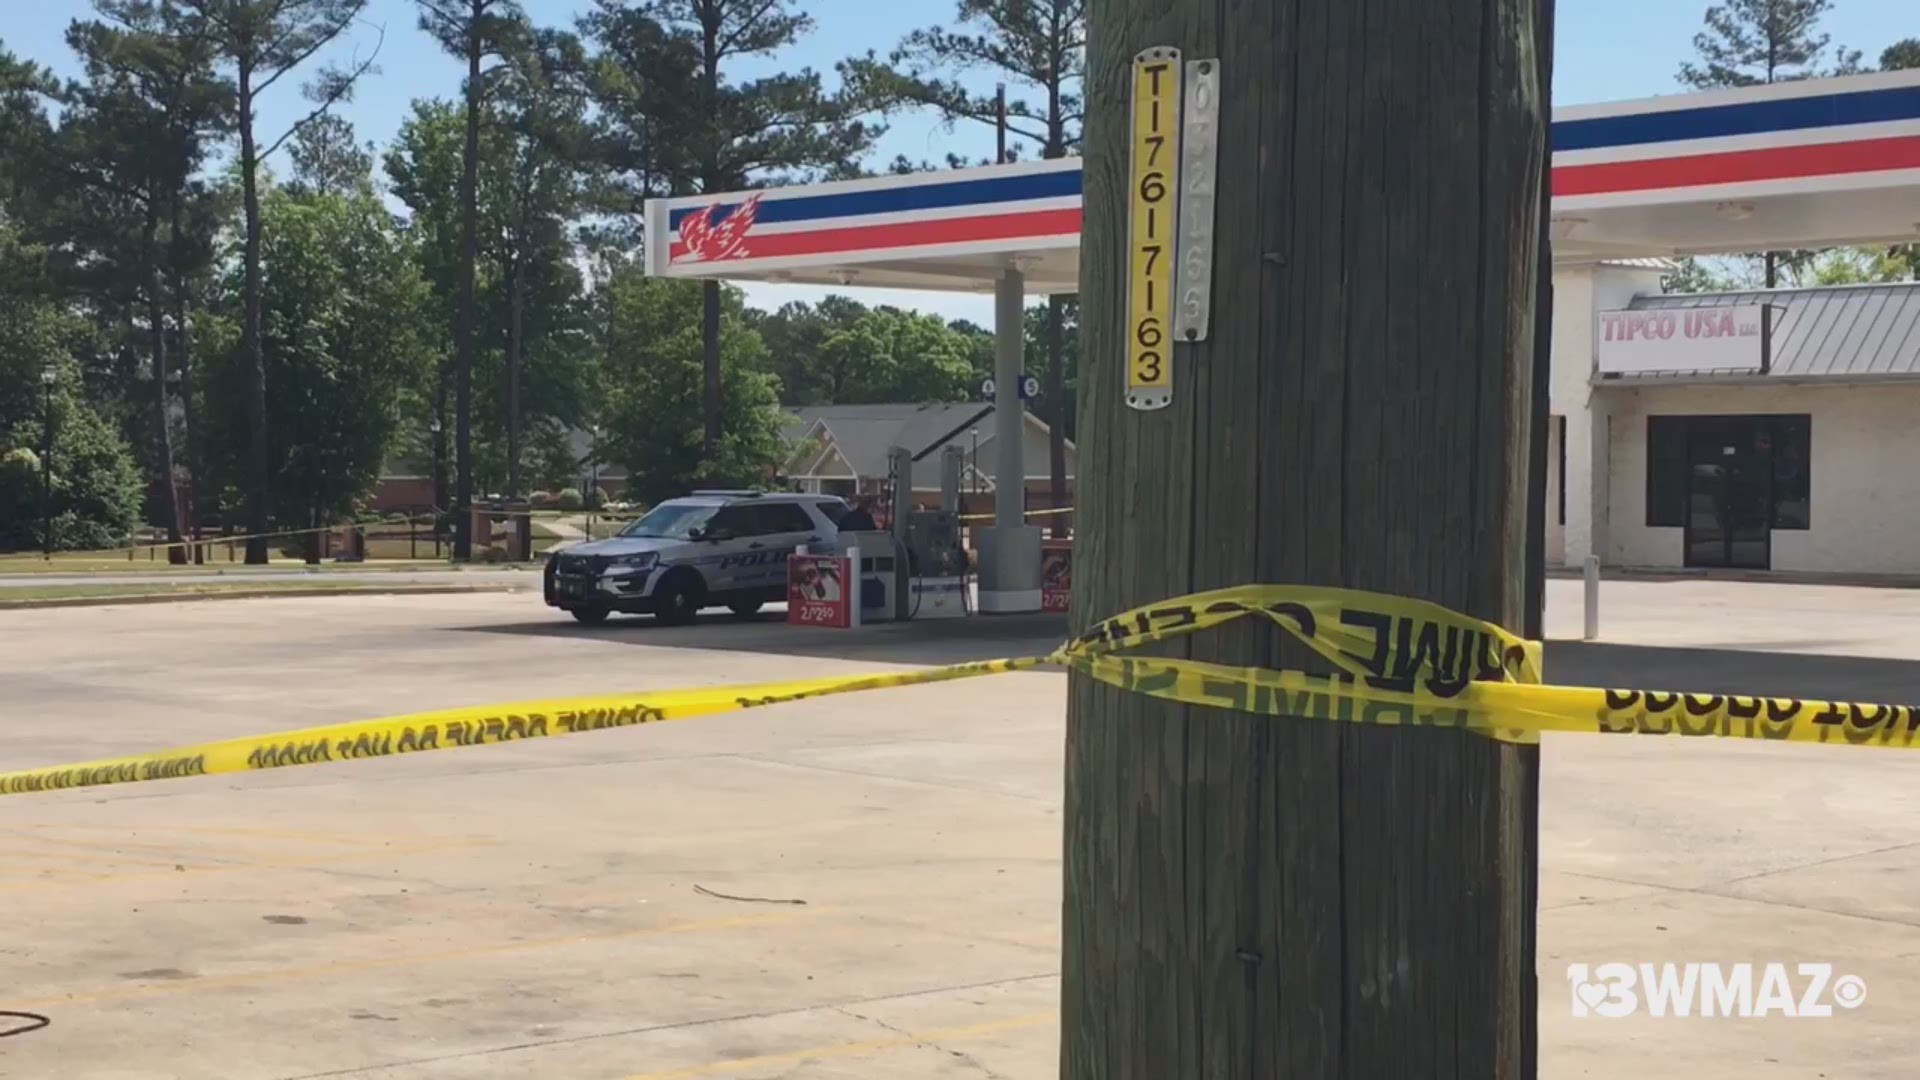 An armed robbery took place at the Om Food Mart on Elberta Road in Warner Robins Sunday morning. Warner Robins police is still looking for the suspect.